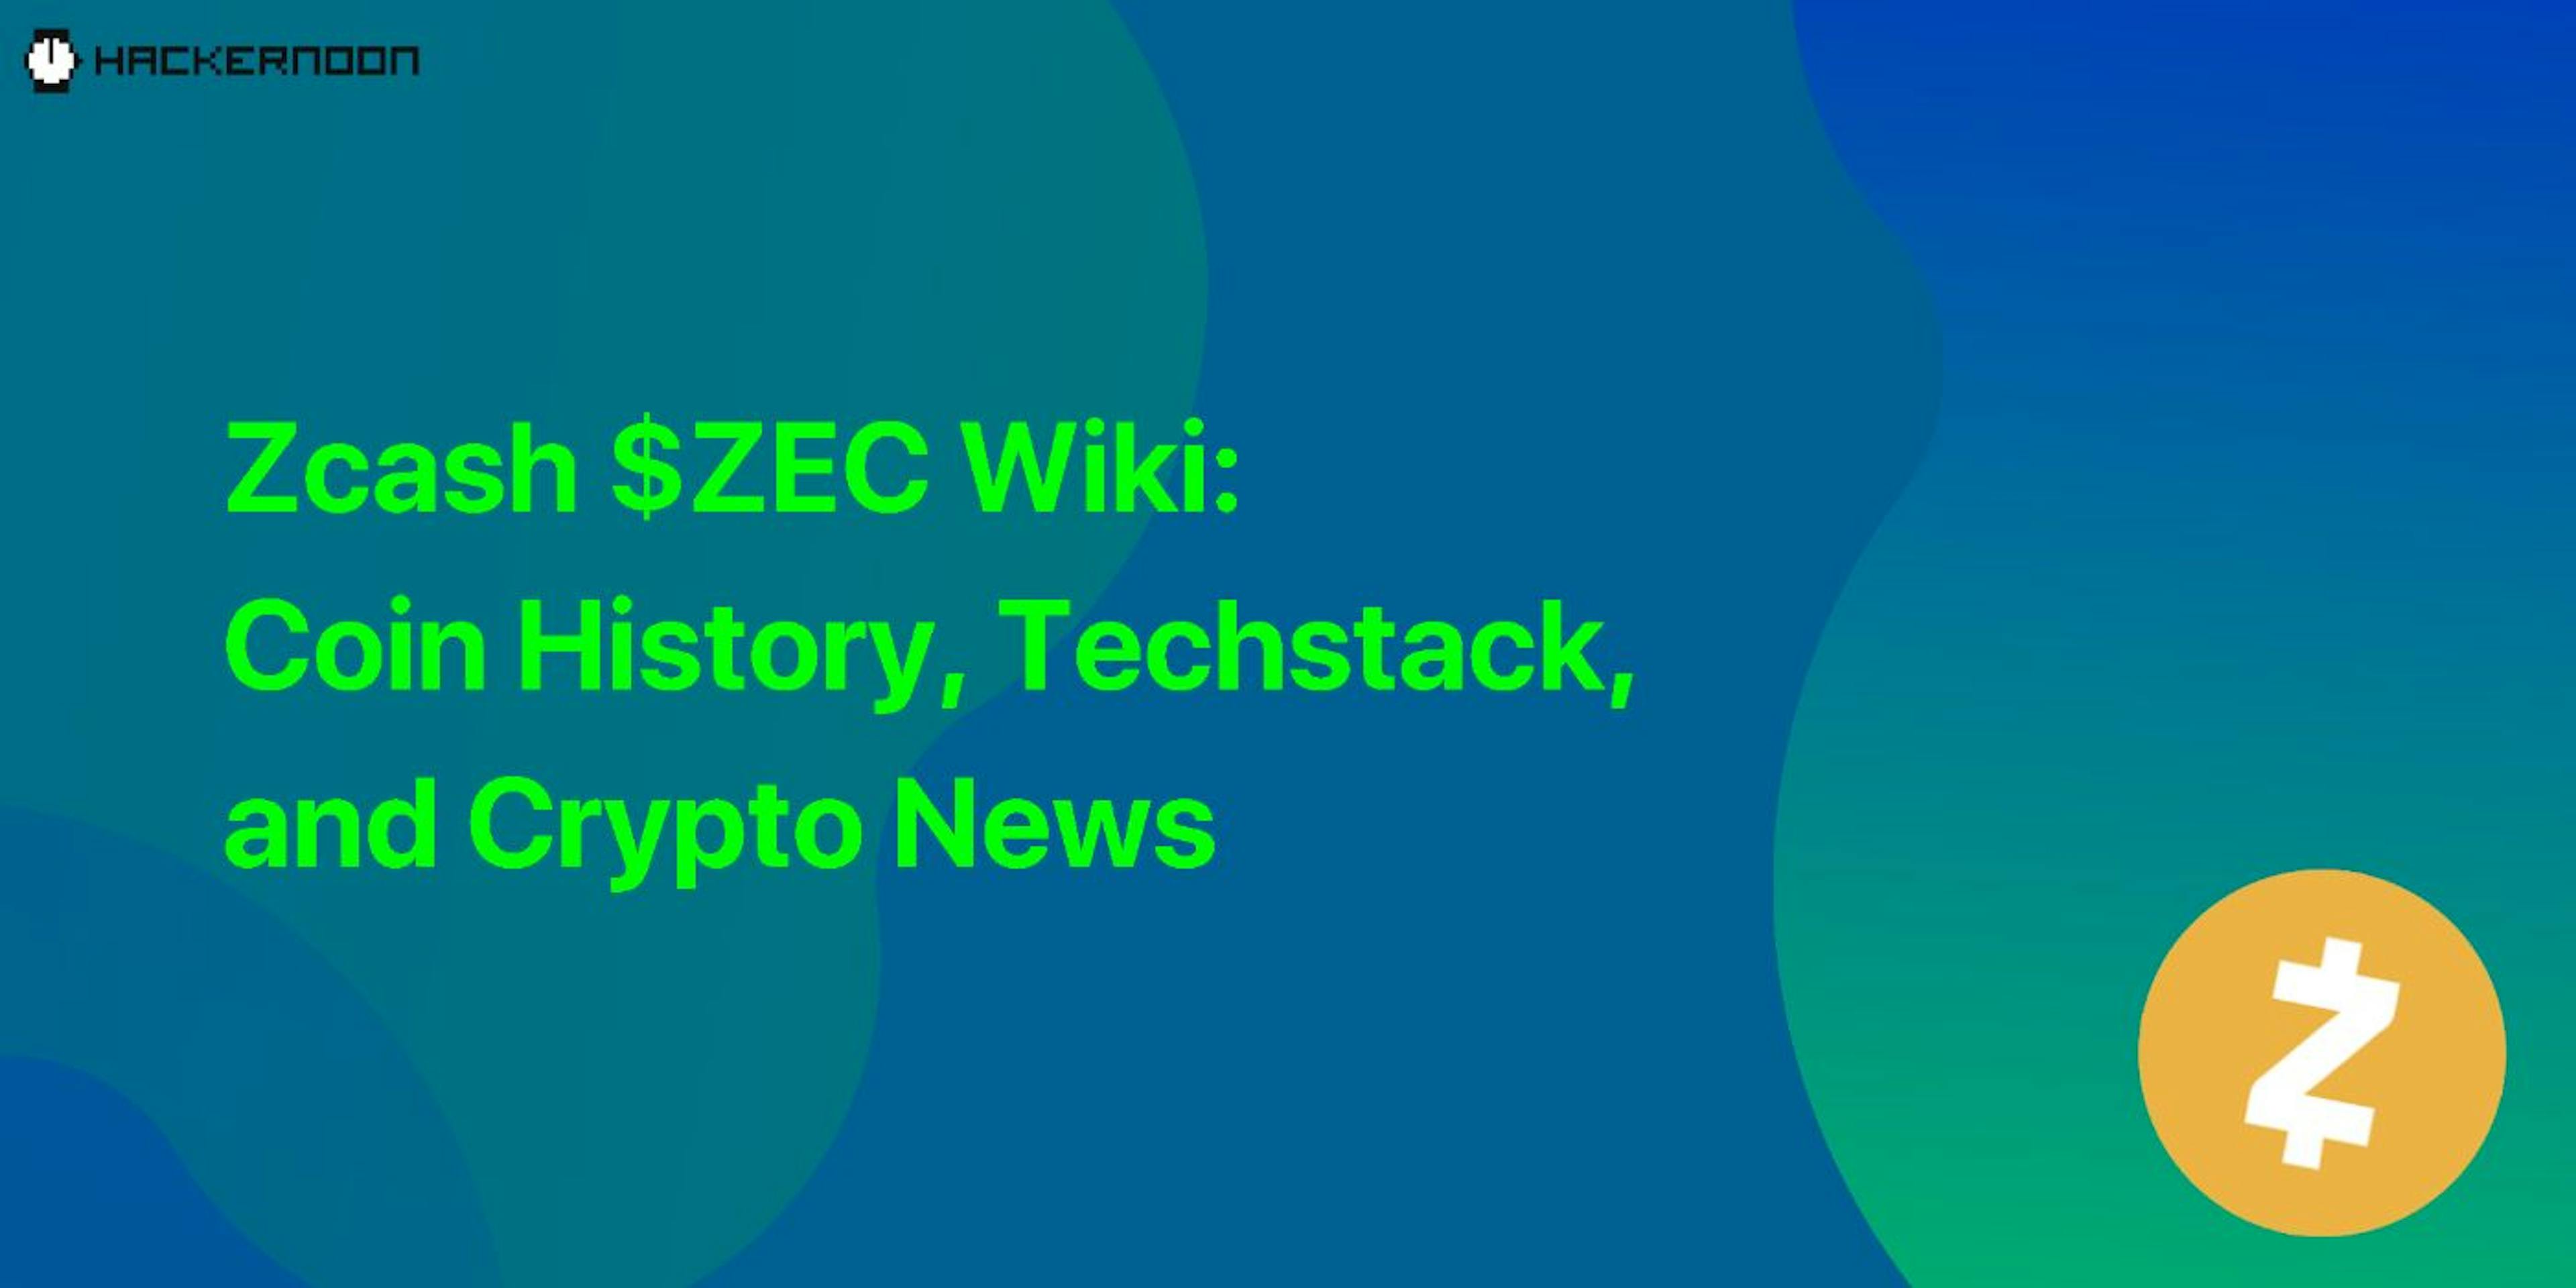 featured image - Zcash $ZEC Wiki: Coin History, Techstack, and Crypto News